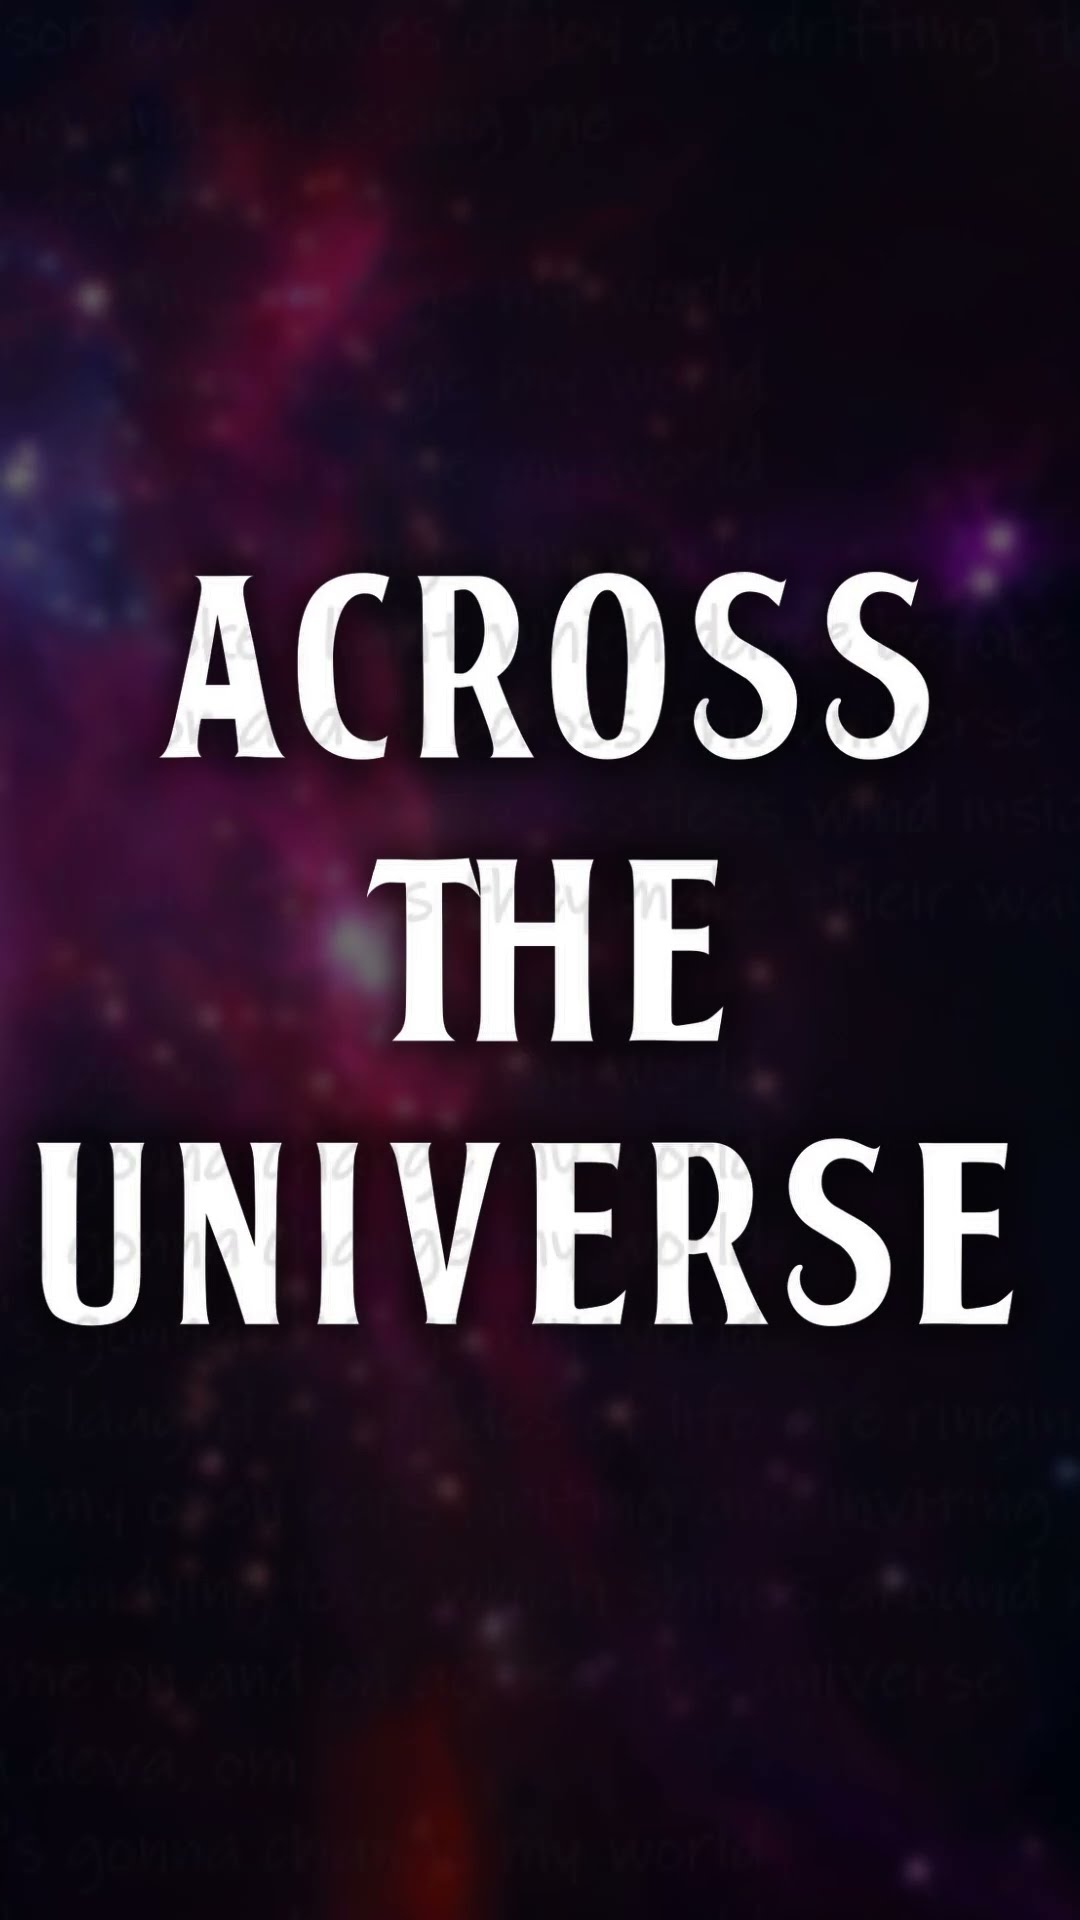 What the Beatles "Across the Universe" is About – #thebeatles #beatles #johnlennon #lyrics